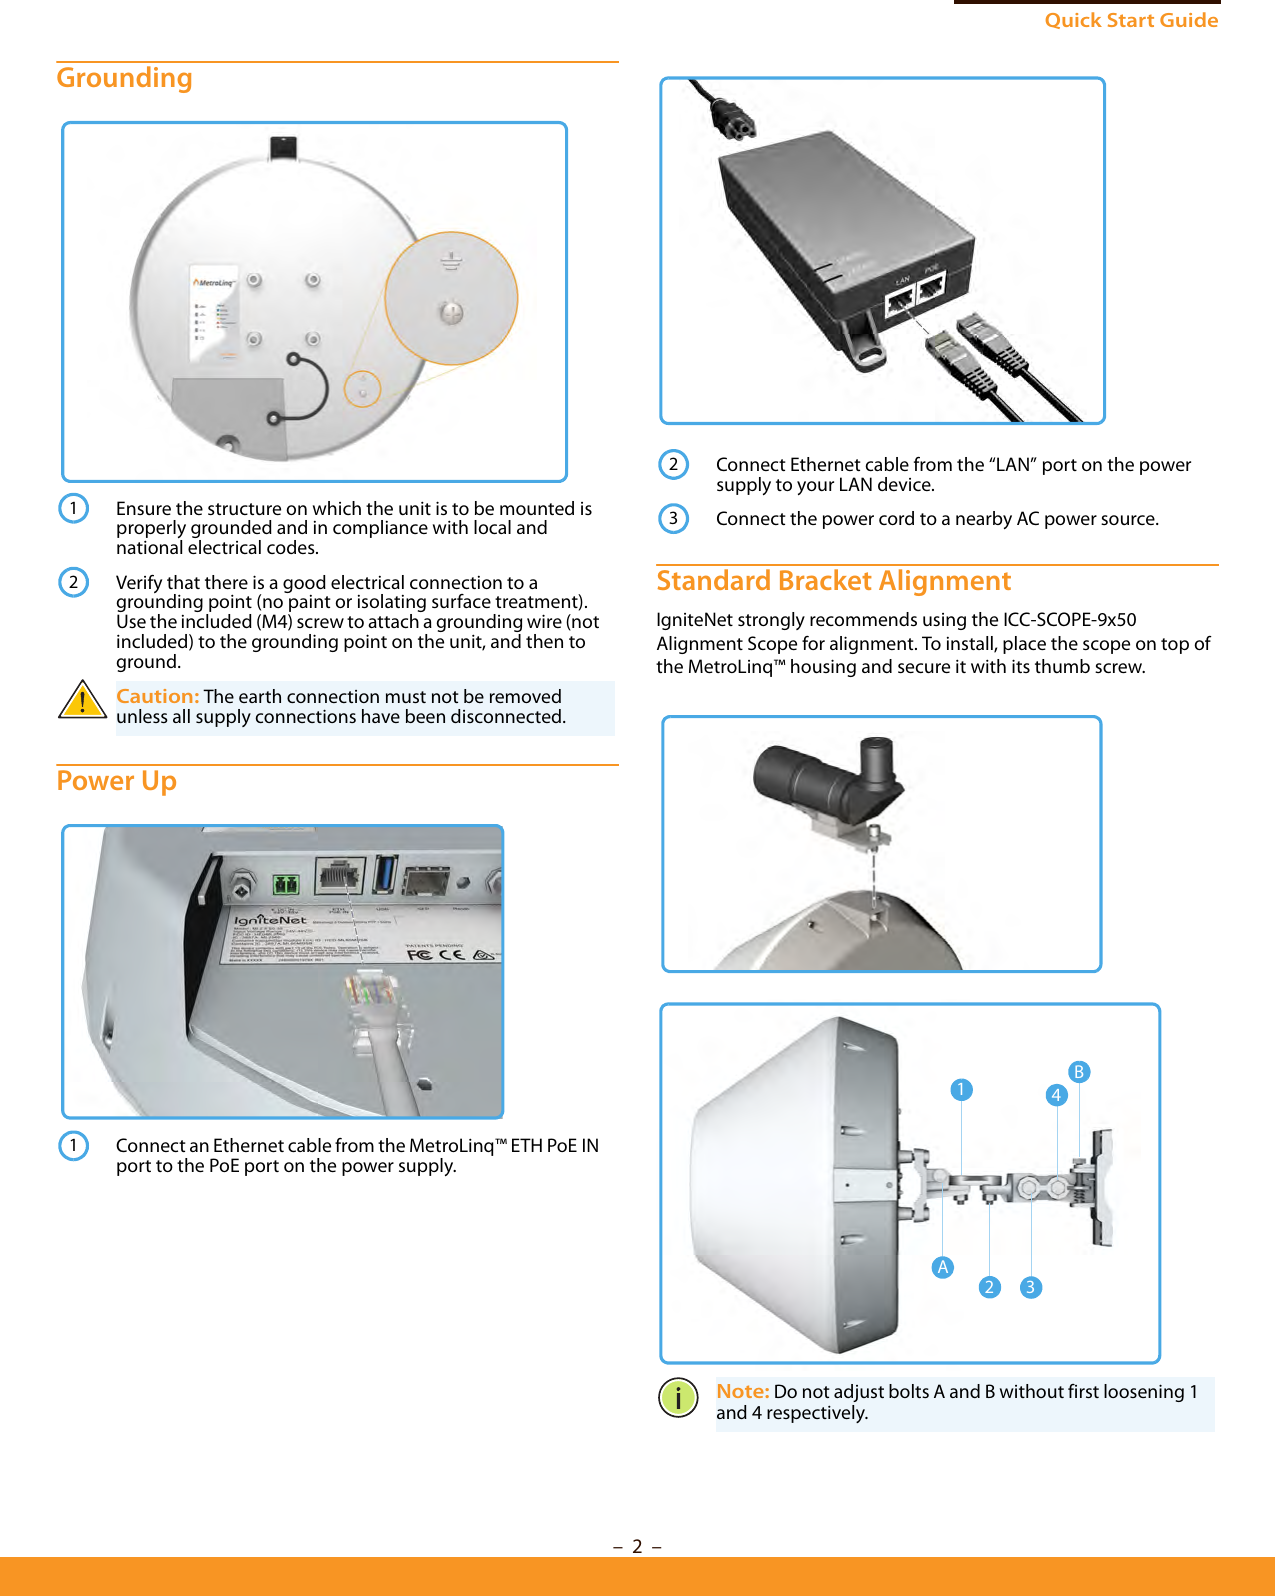 Quick Start Guide–  2  –Grounding Power Up Standard Bracket AlignmentIgniteNet strongly recommends using the ICC-SCOPE-9x50 Alignment Scope for alignment. To install, place the scope on top of the MetroLinq™ housing and secure it with its thumb screw.Ensure the structure on which the unit is to be mounted is properly grounded and in compliance with local and national electrical codes.Verify that there is a good electrical connection to a grounding point (no paint or isolating surface treatment). Use the included (M4) screw to attach a grounding wire (not included) to the grounding point on the unit, and then to ground.Caution: The earth connection must not be removed unless all supply connections have been disconnected.Connect an Ethernet cable from the MetroLinq™ ETH PoE IN port to the PoE port on the power supply.121Connect Ethernet cable from the “LAN” port on the power supply to your LAN device.Connect the power cord to a nearby AC power source.Note: Do not adjust bolts A and B without first loosening 1 and 4 respectively.2314A23B